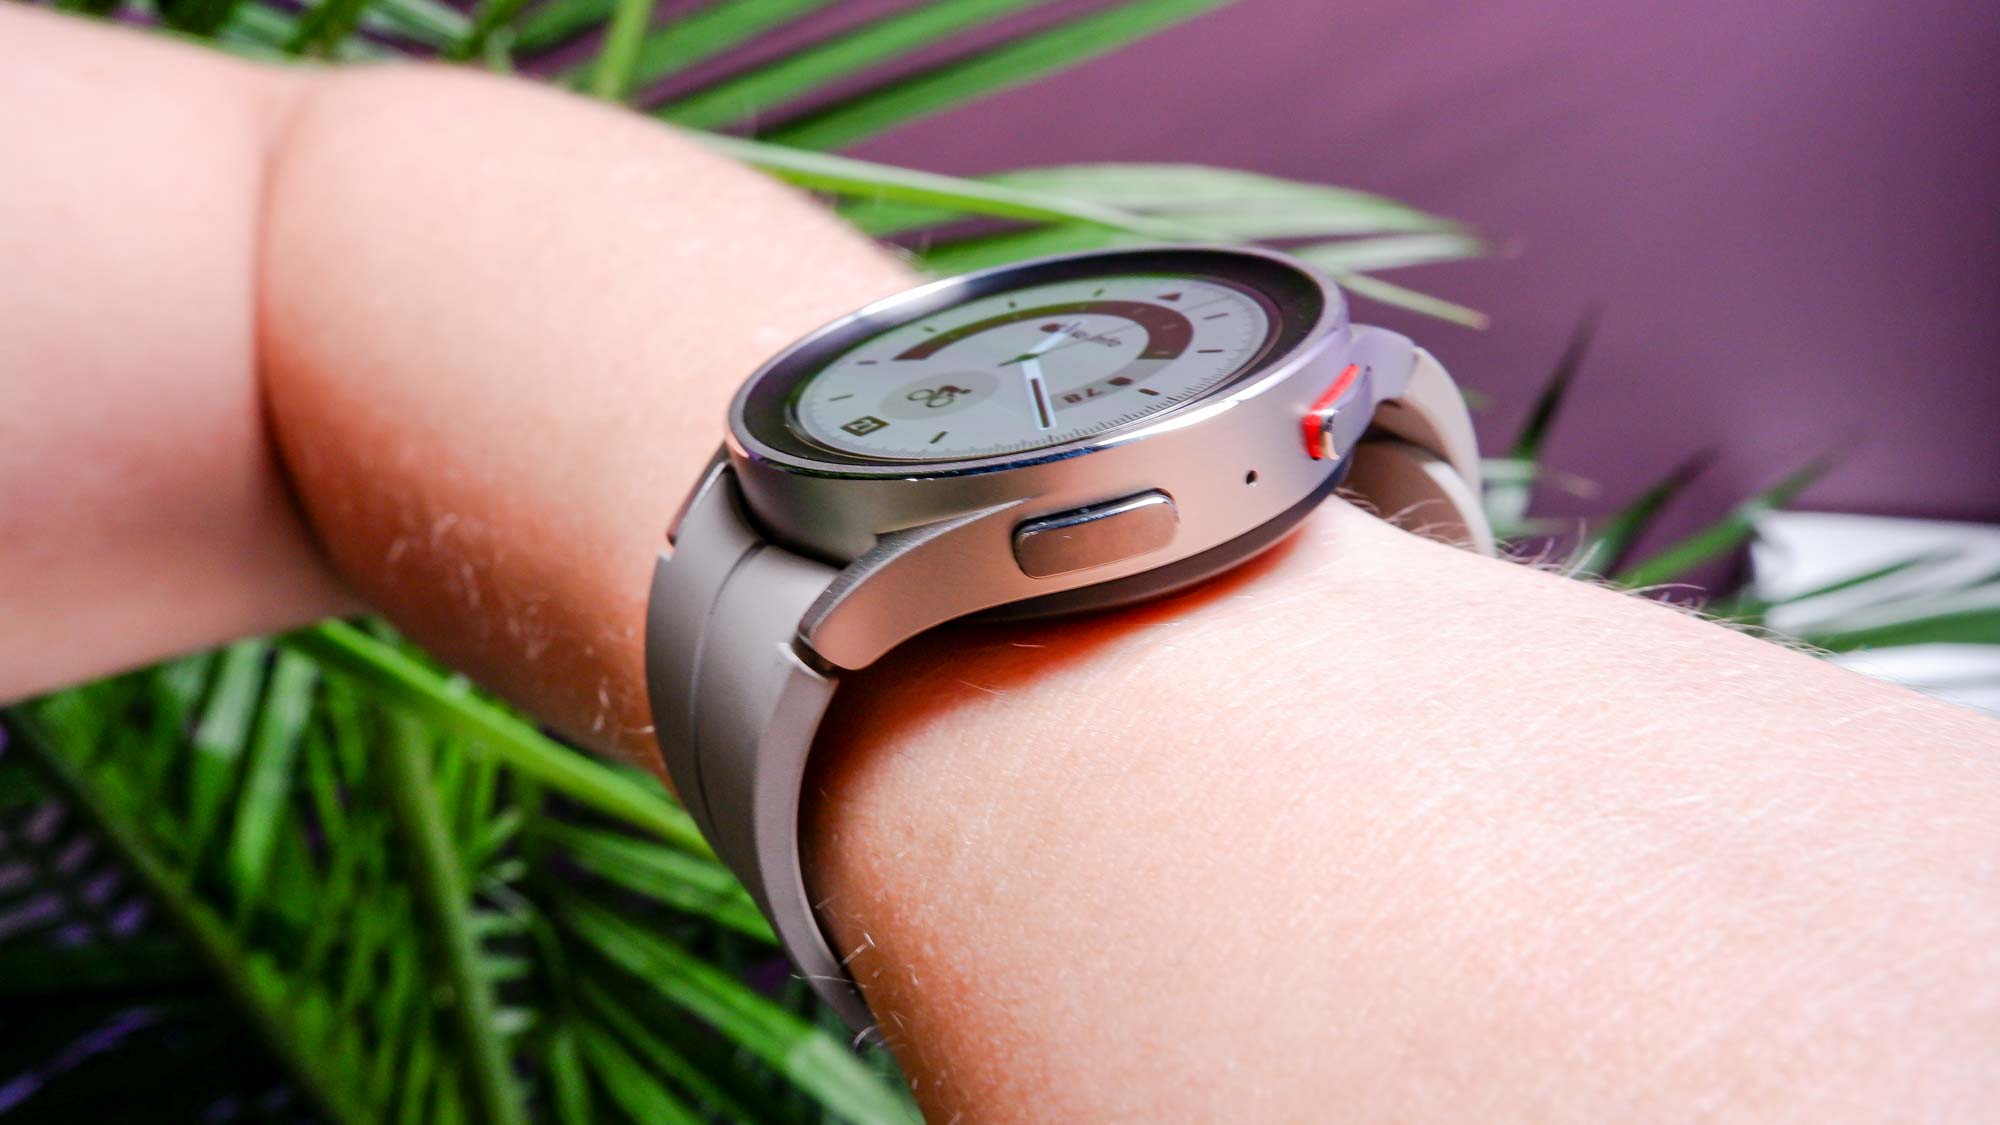 Samsung Galaxy Watch 5 Pro hands-on review: Outdoor-friendly, amazing battery life